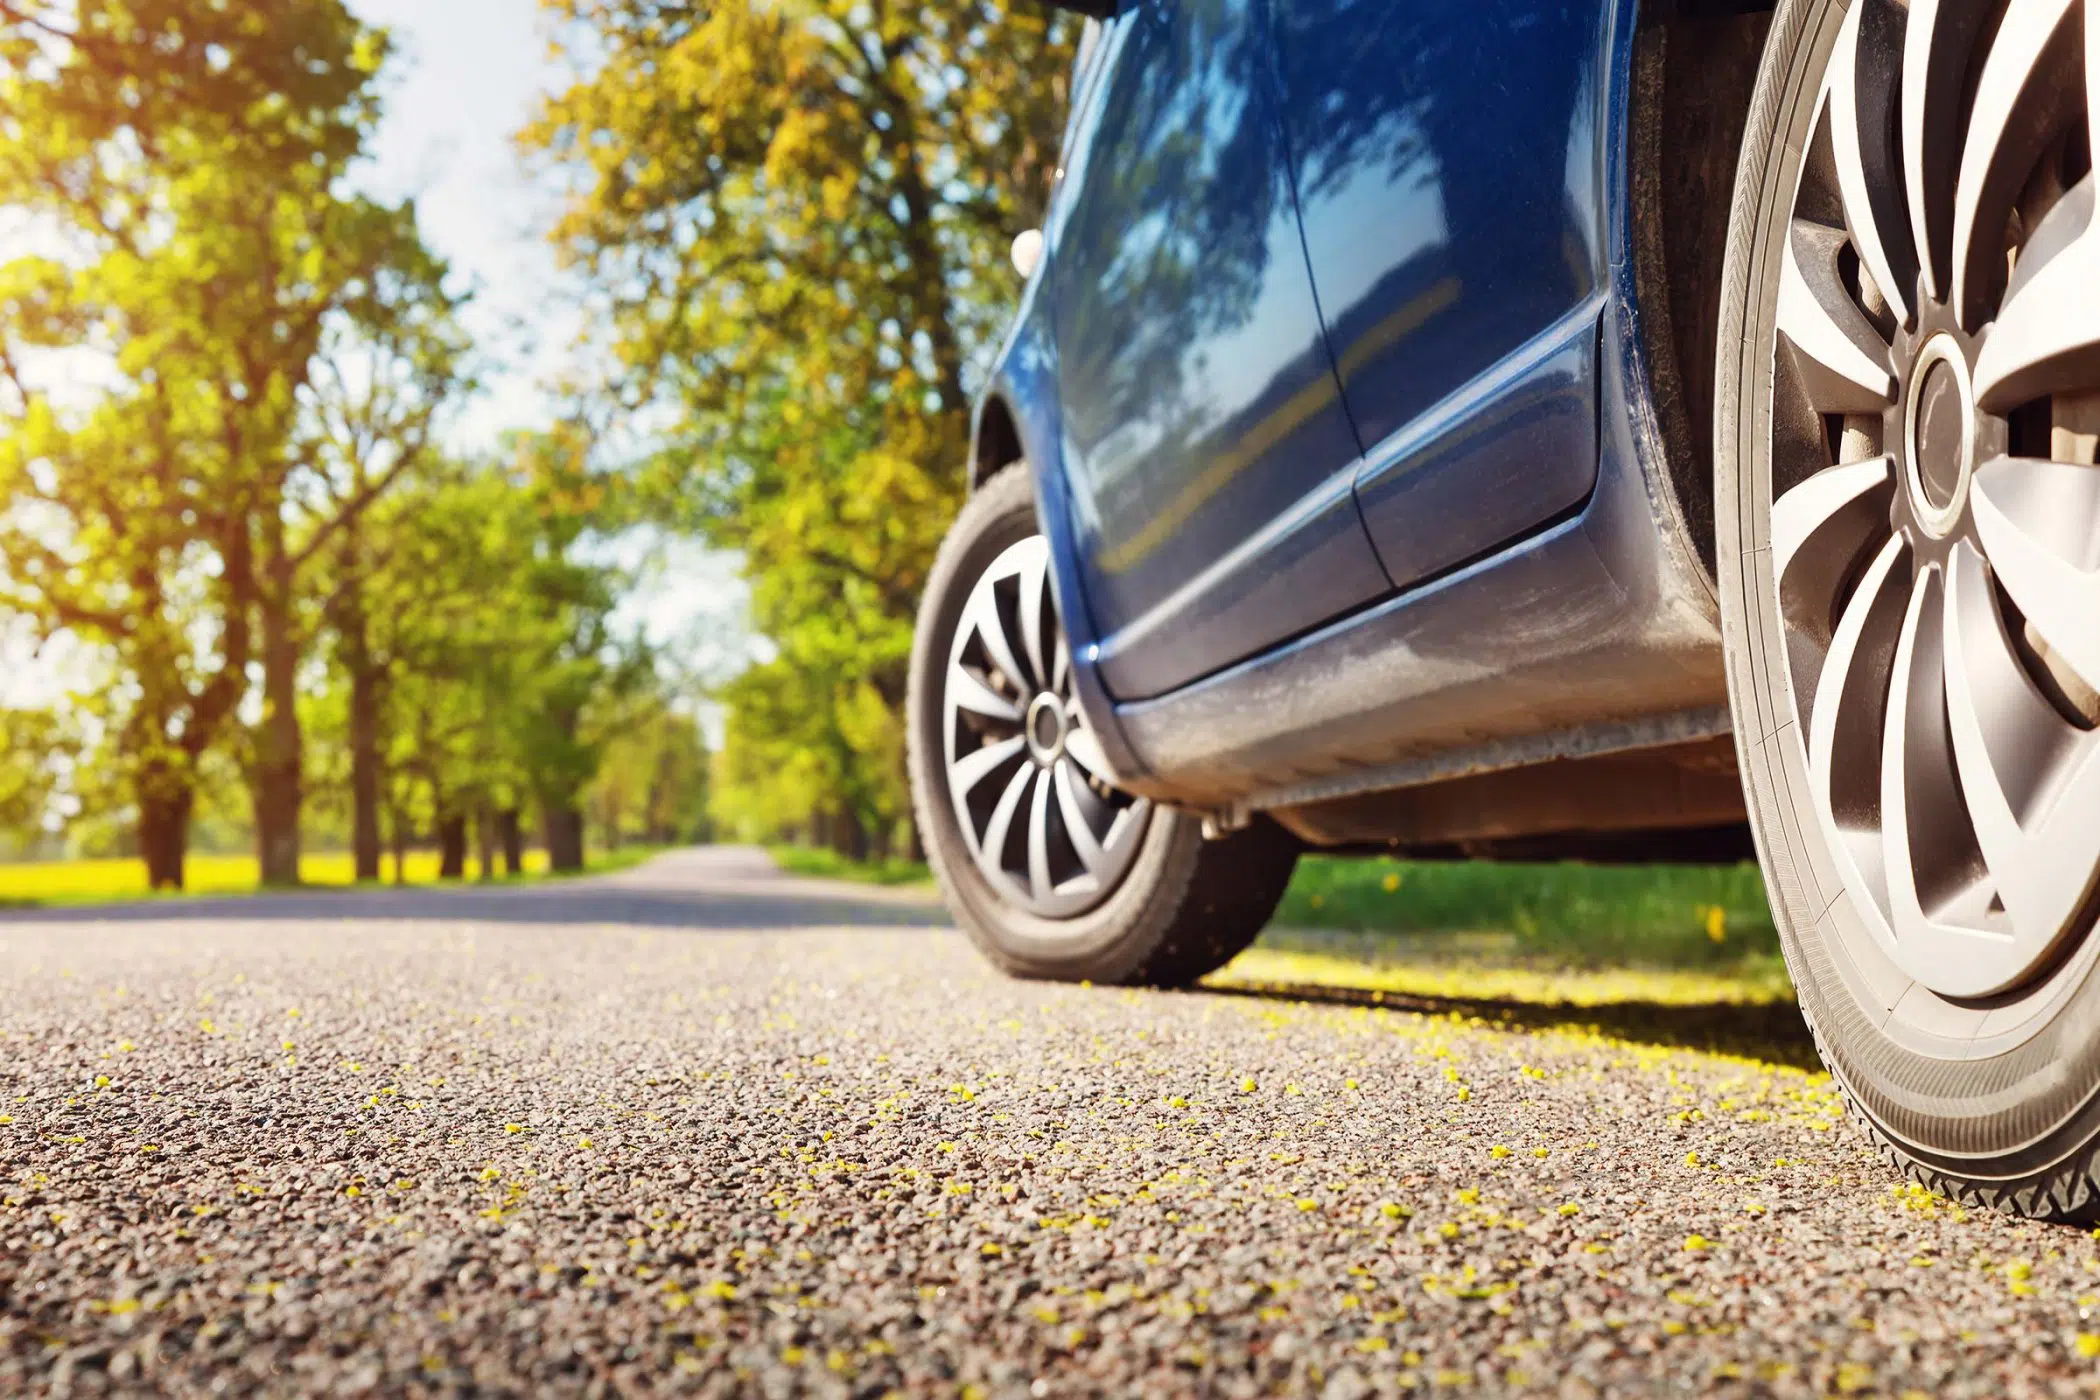 Car Care Tips If You're Parking Your Vehicle Short-Term